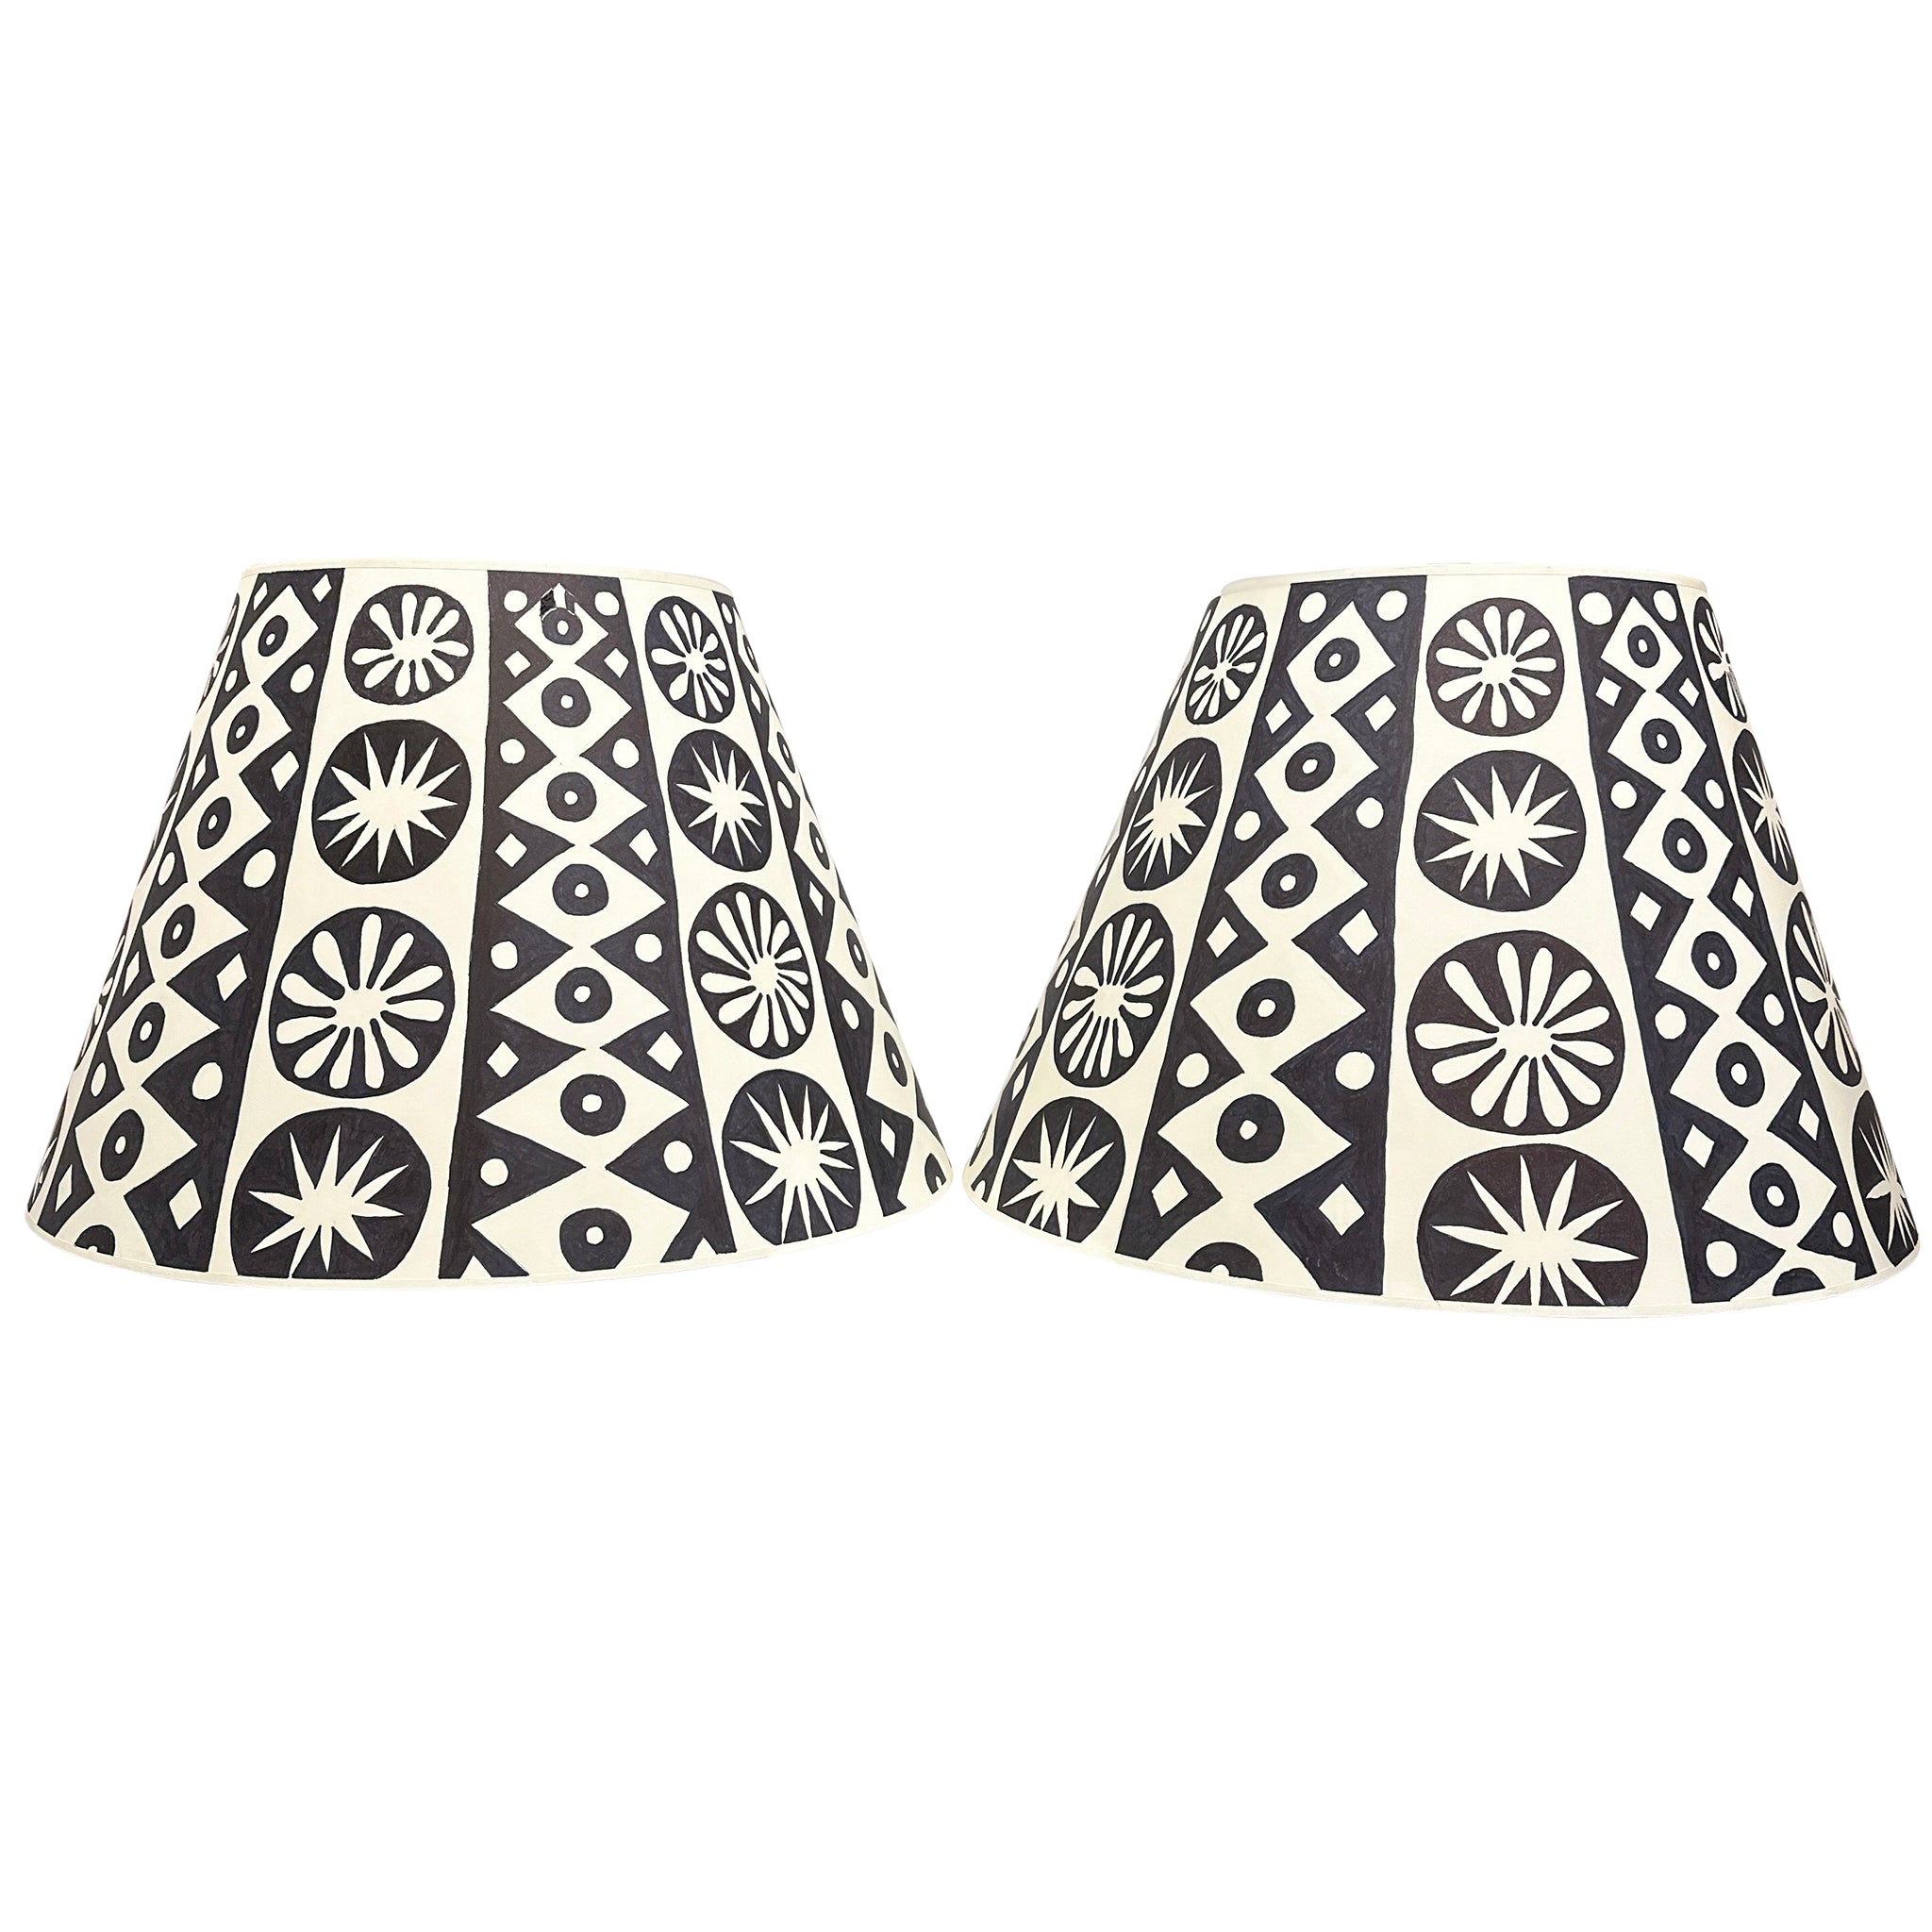 Pair of Hand-Decorated Lampshade in Black and White Geometric